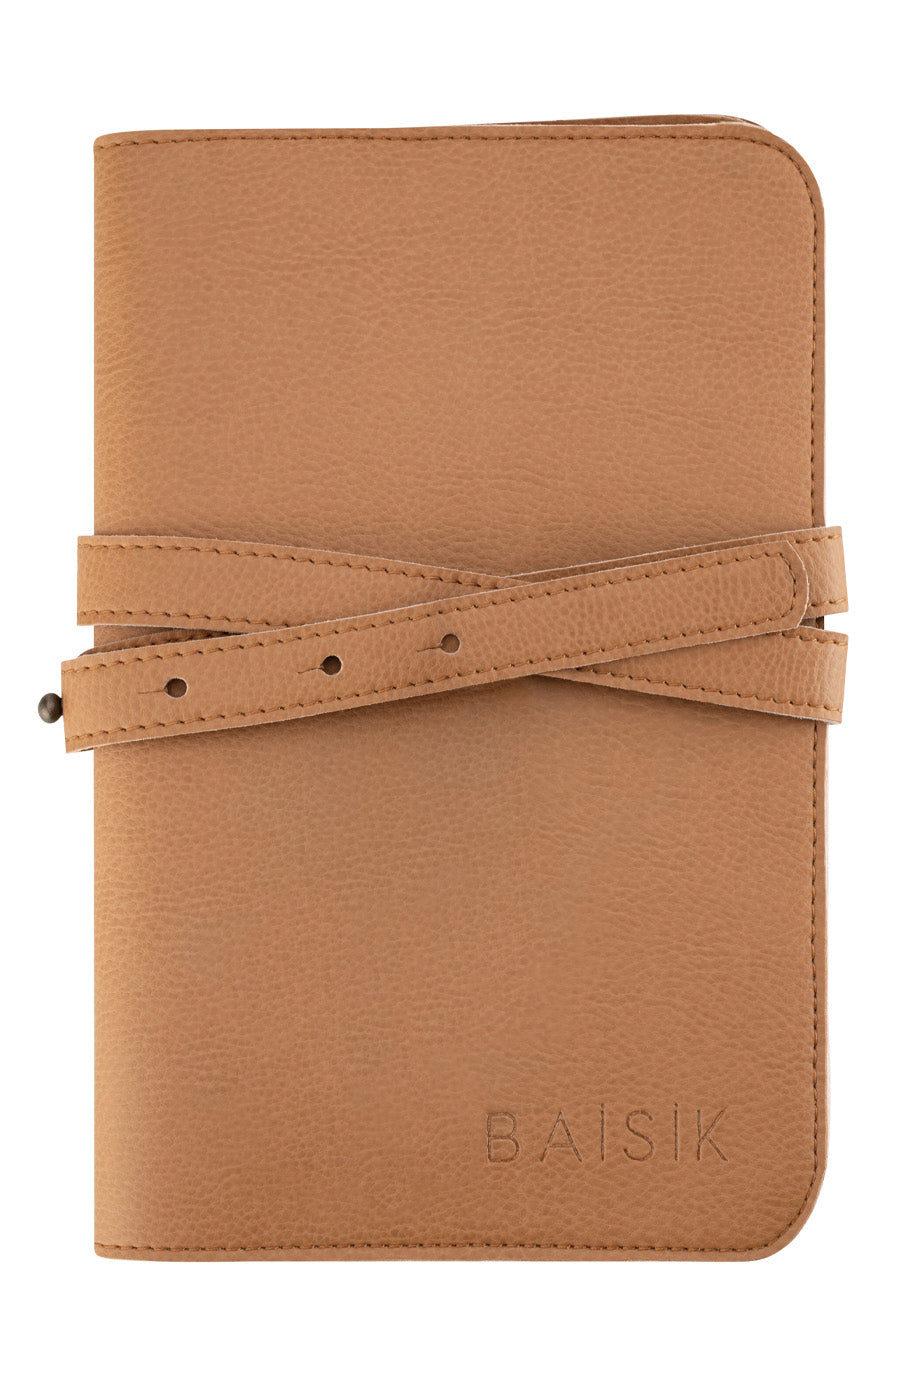 BAISIK nappy wallet pouch vegan leather natural with strap  brown 